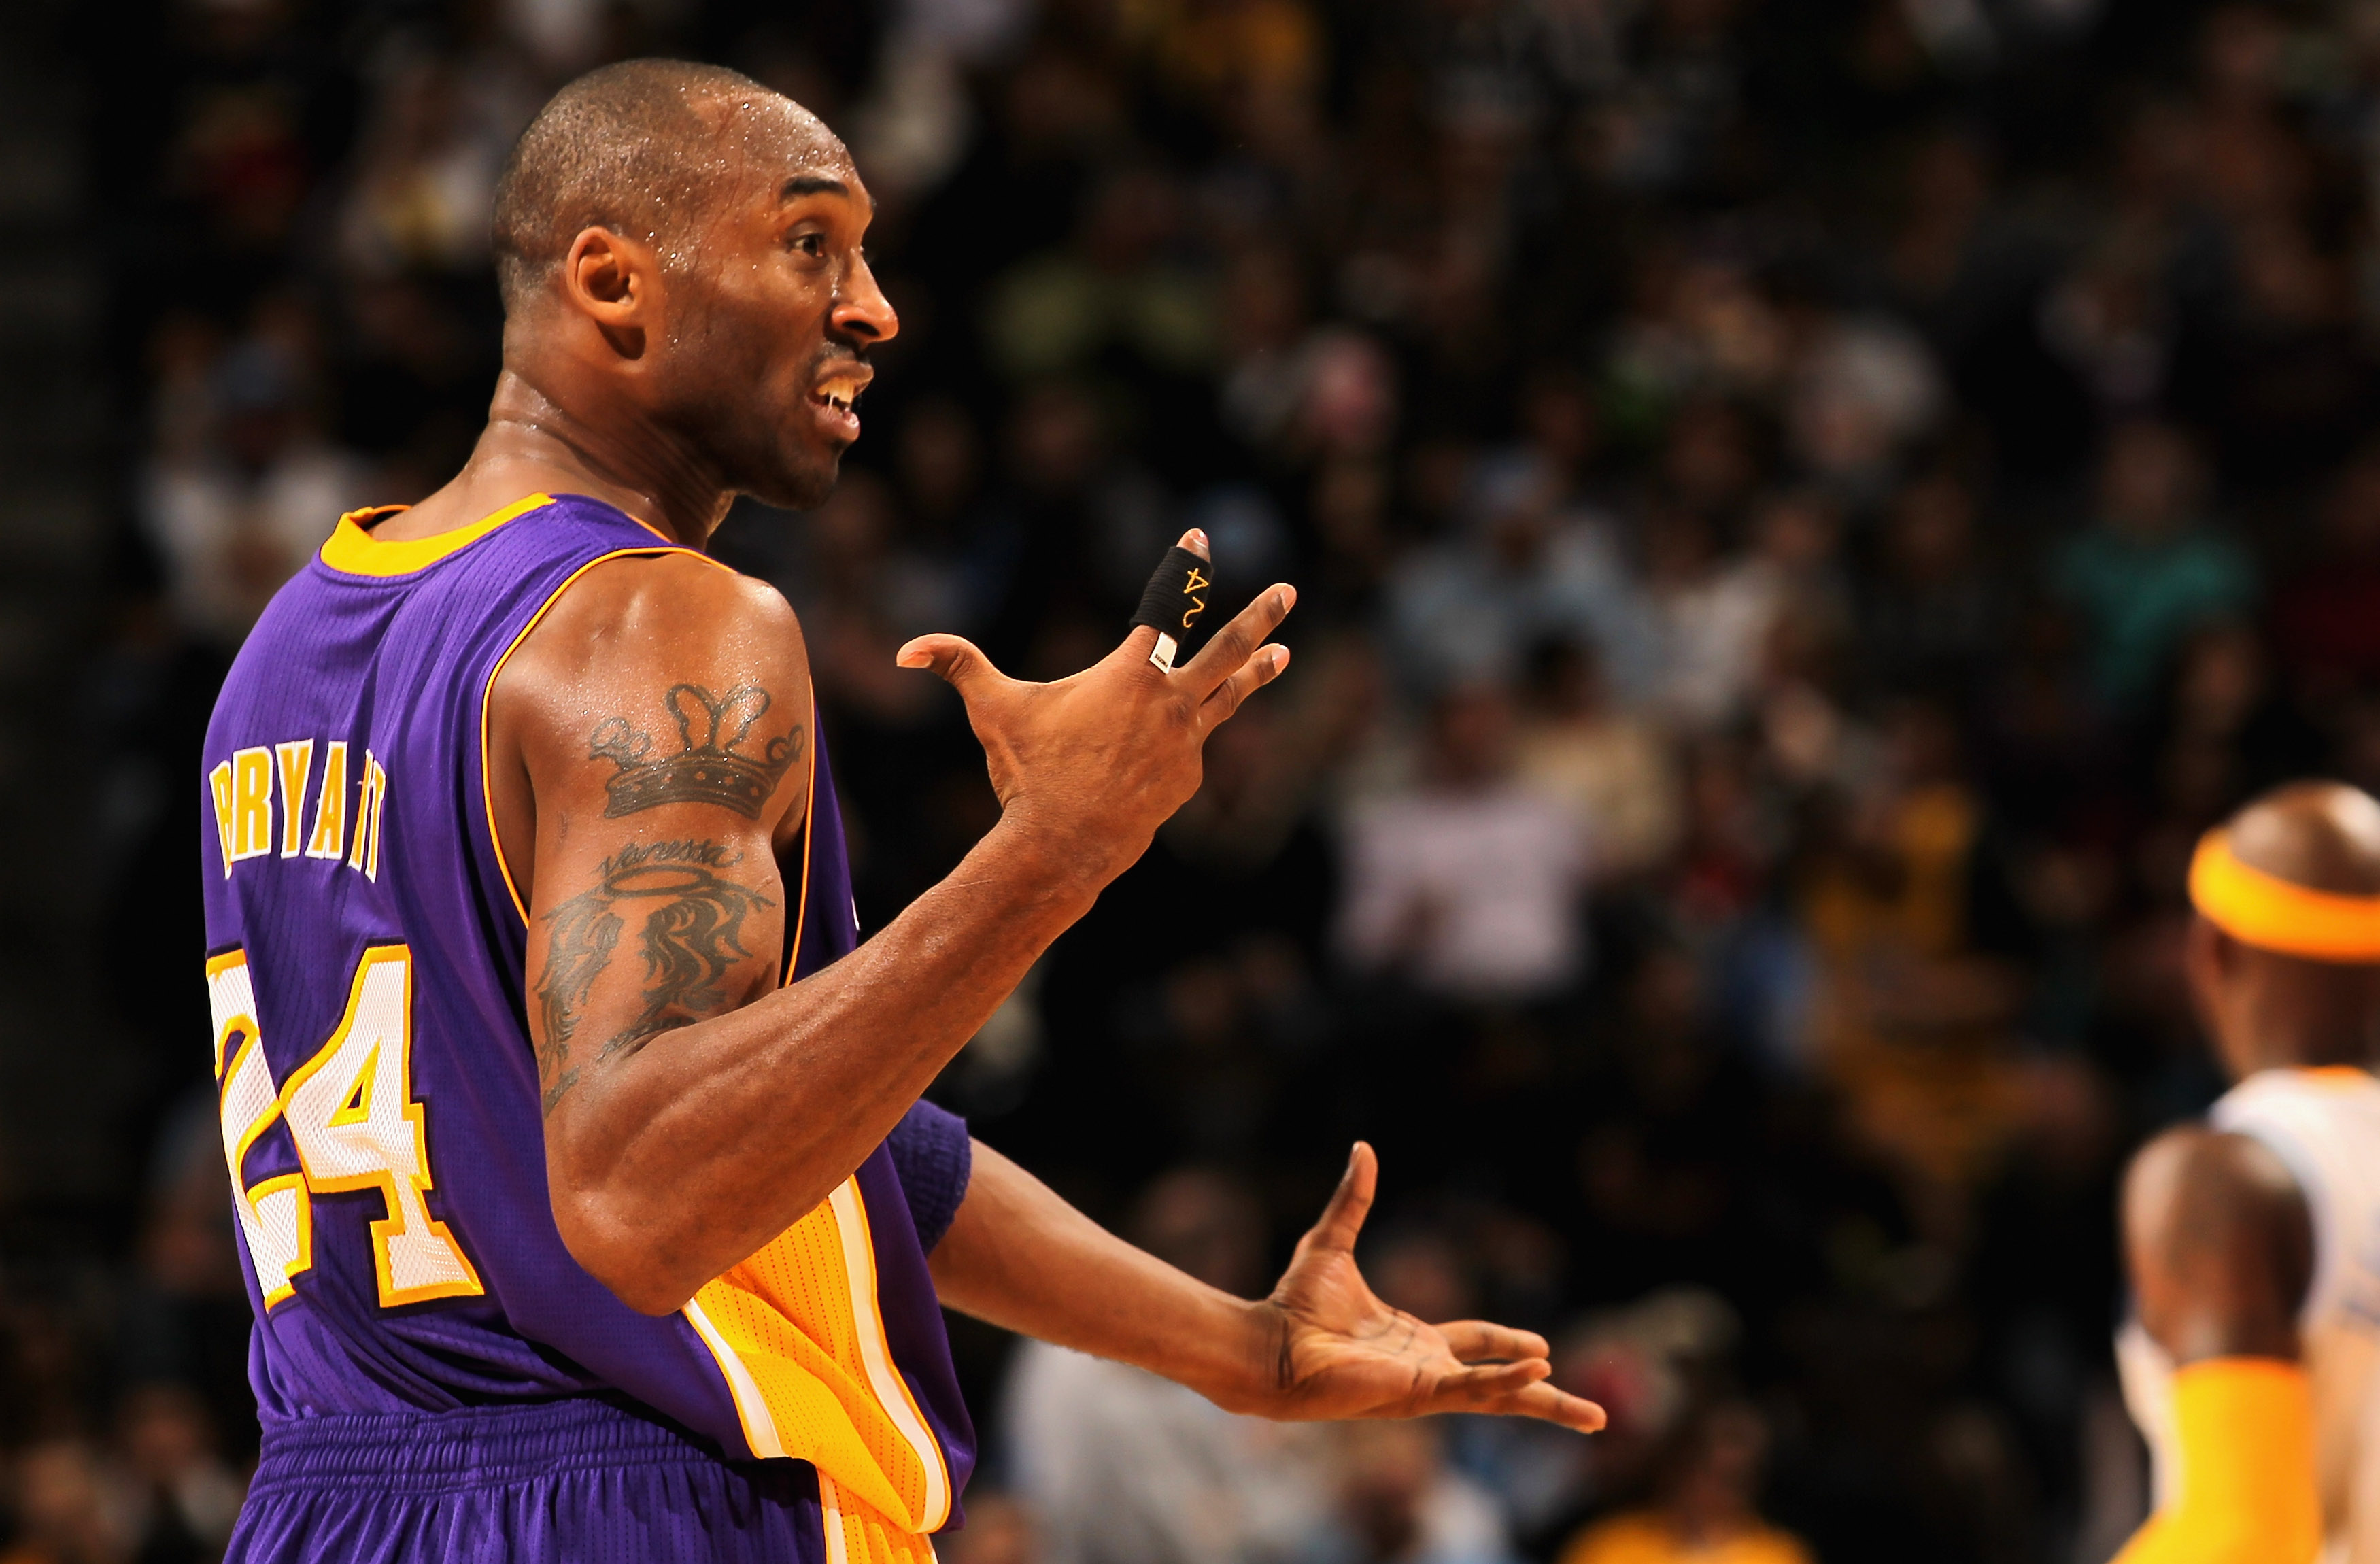 Bleacher Report - Kobe Bryant names the top 5 players he has faced